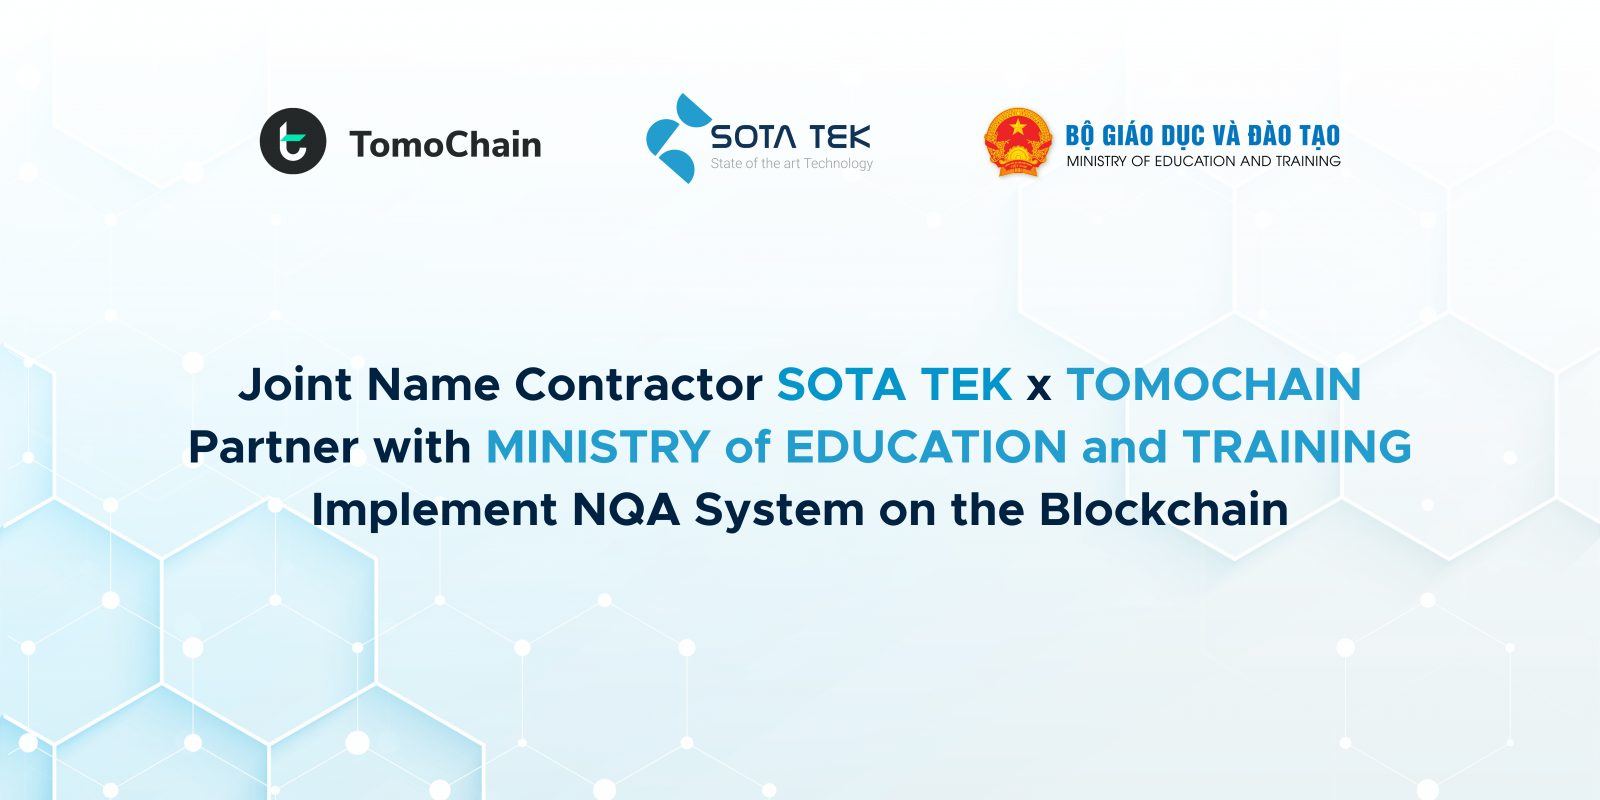 SOTATEK x TOMOCHAIN Partner with Vietnam's Ministry of Education and Training Implement NQA System on the Blockchain